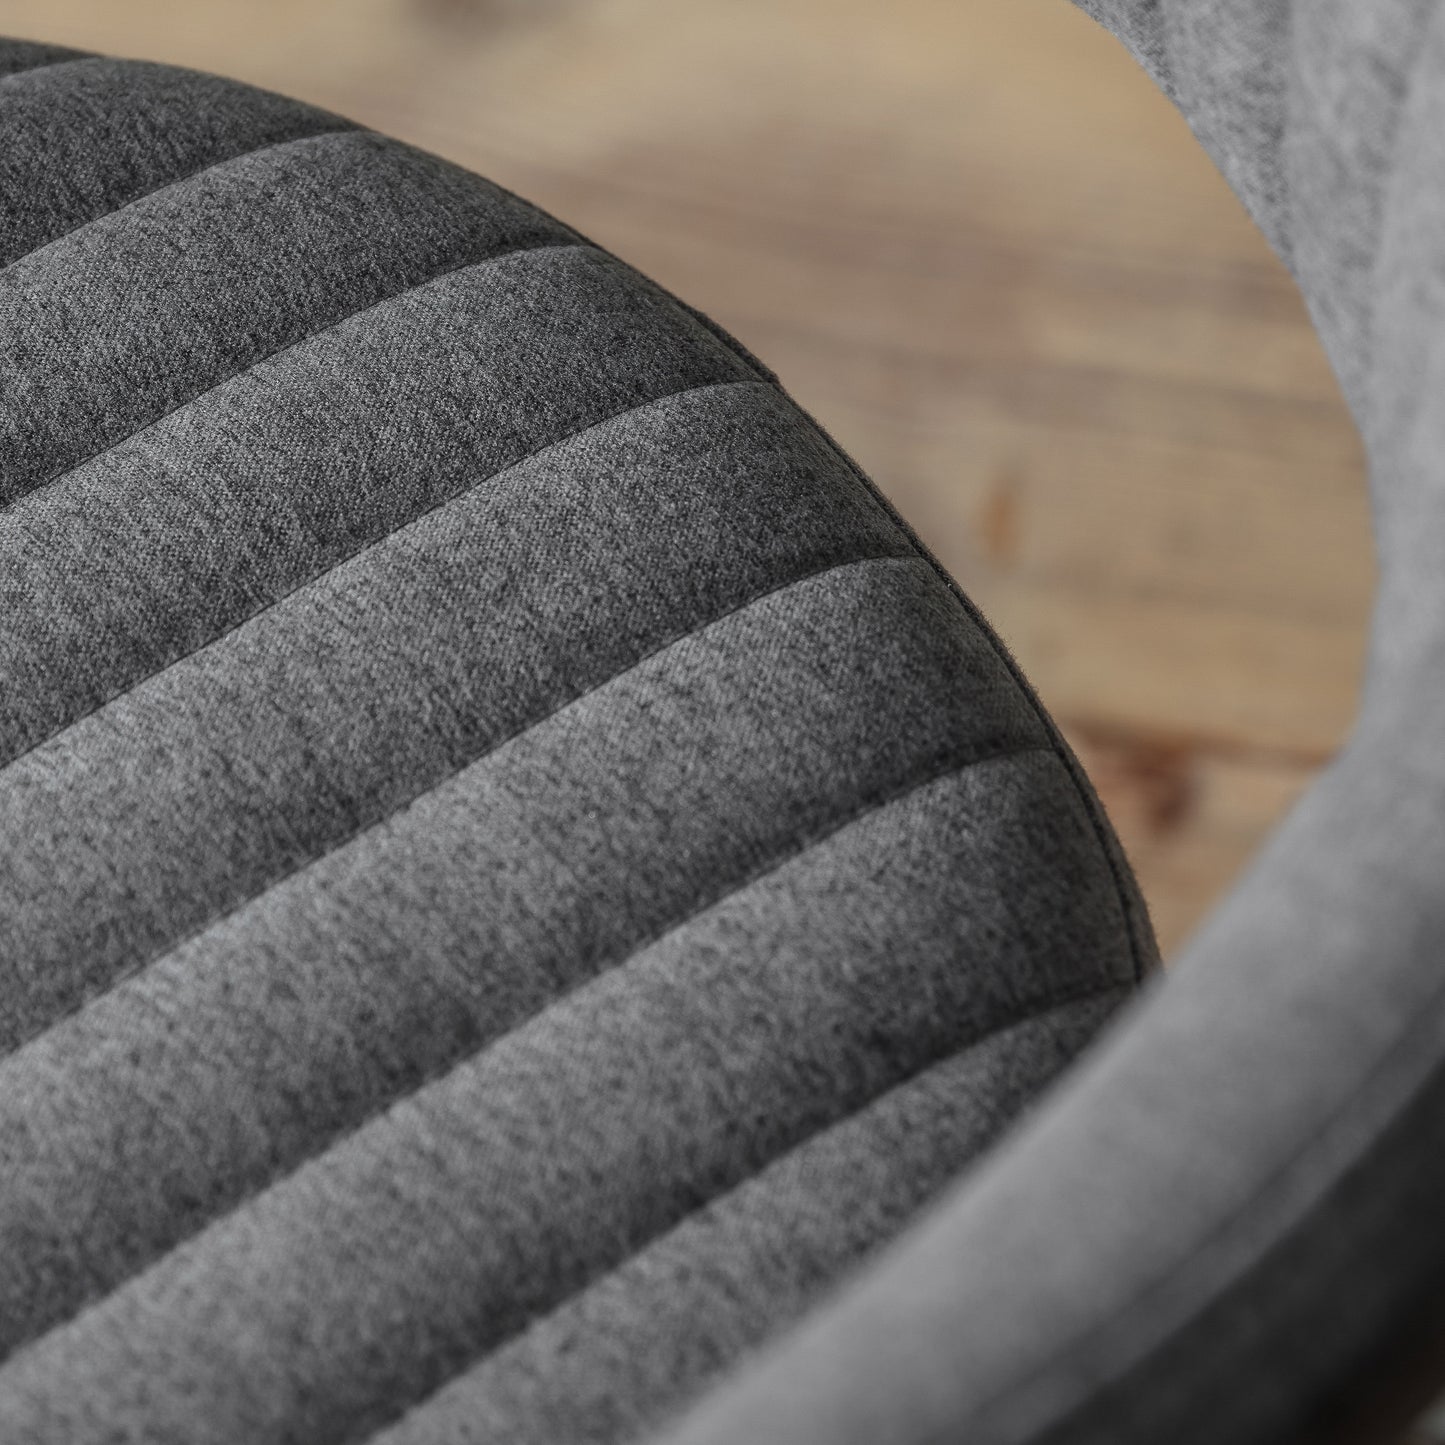 A close up of the Kikiathome.co.uk McIntyre Swivel Chair in Charcoal for interior decor.